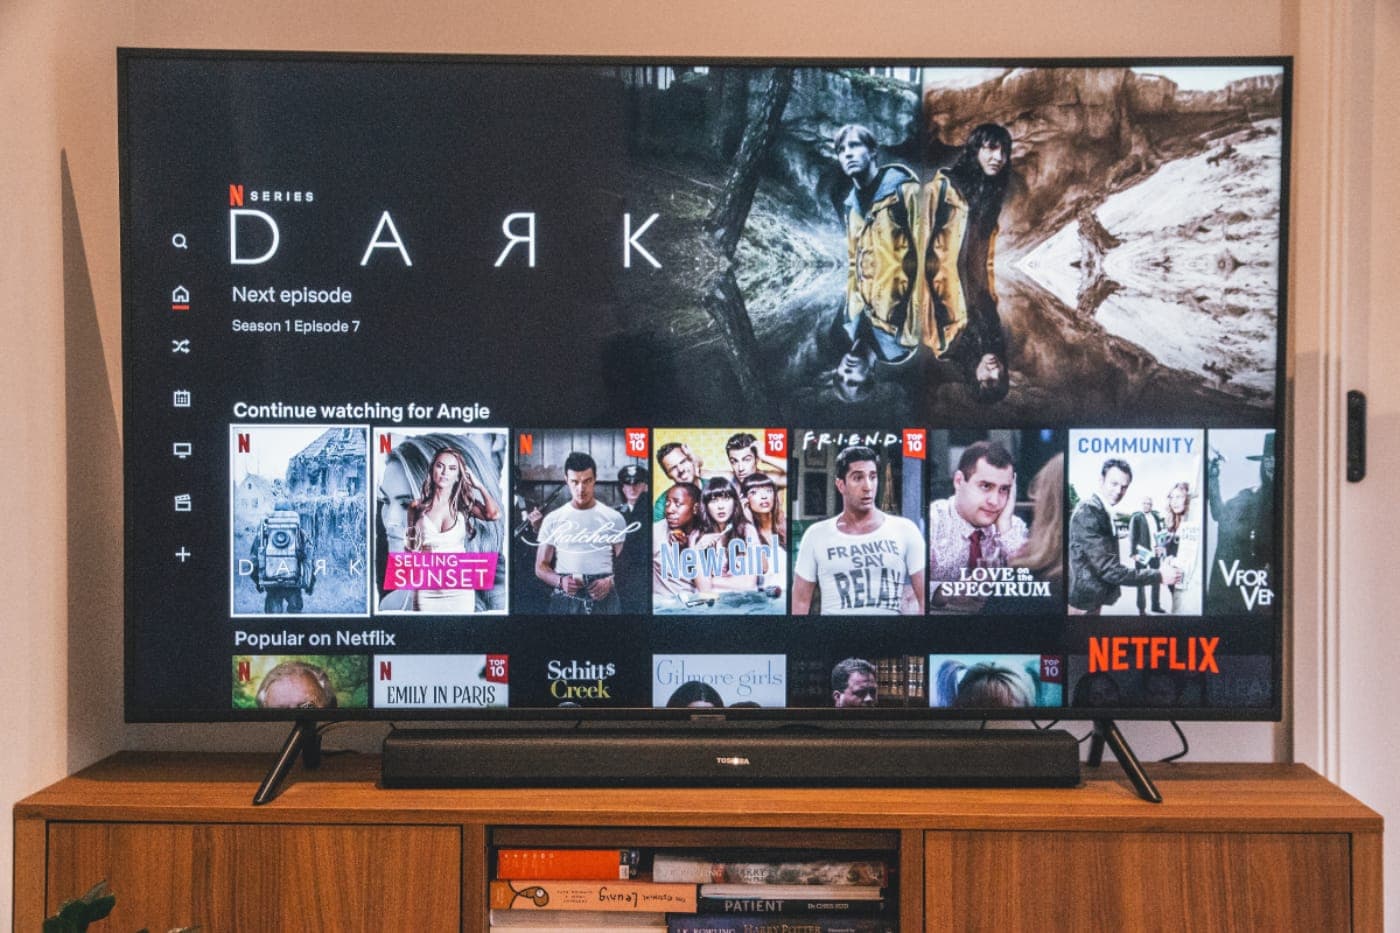 Netflix now allows you to remove content from "Keep watching" from the TV app